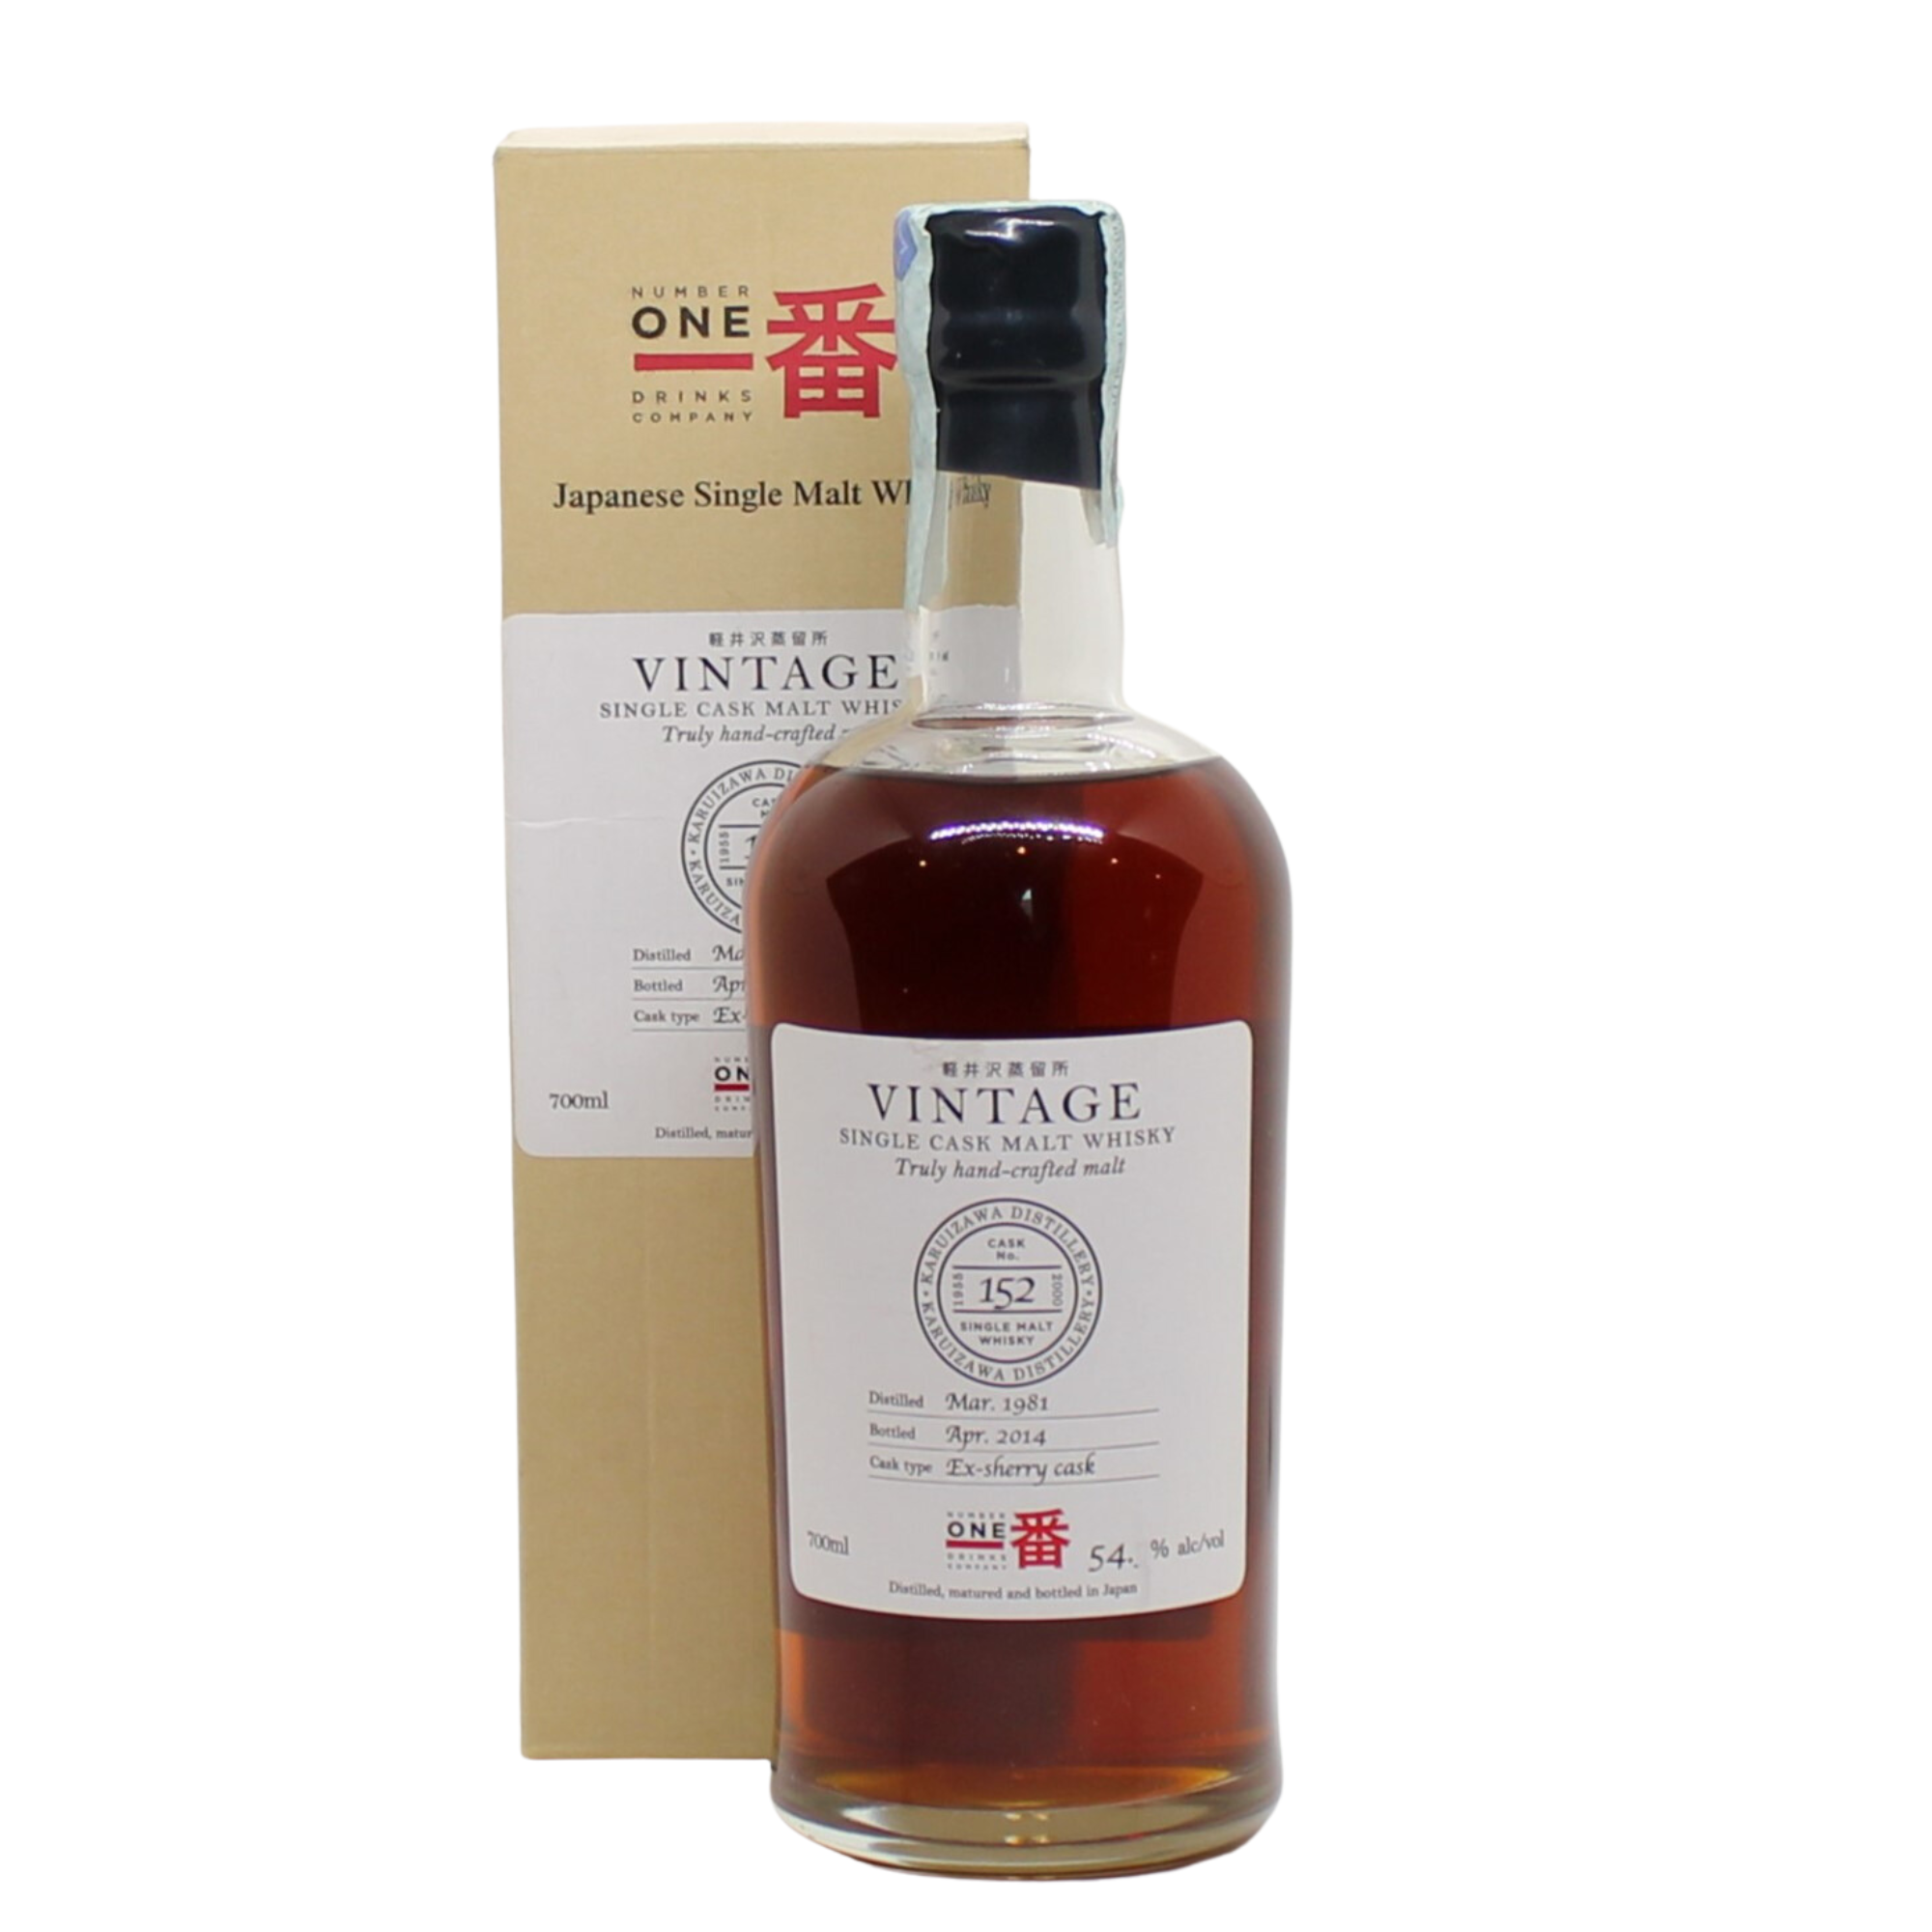 Rare and vintage Karuizawa single malt Japanese whisky, distilled in 1981, matured in Ex-Sherry Cask #152 and bottled in 2014